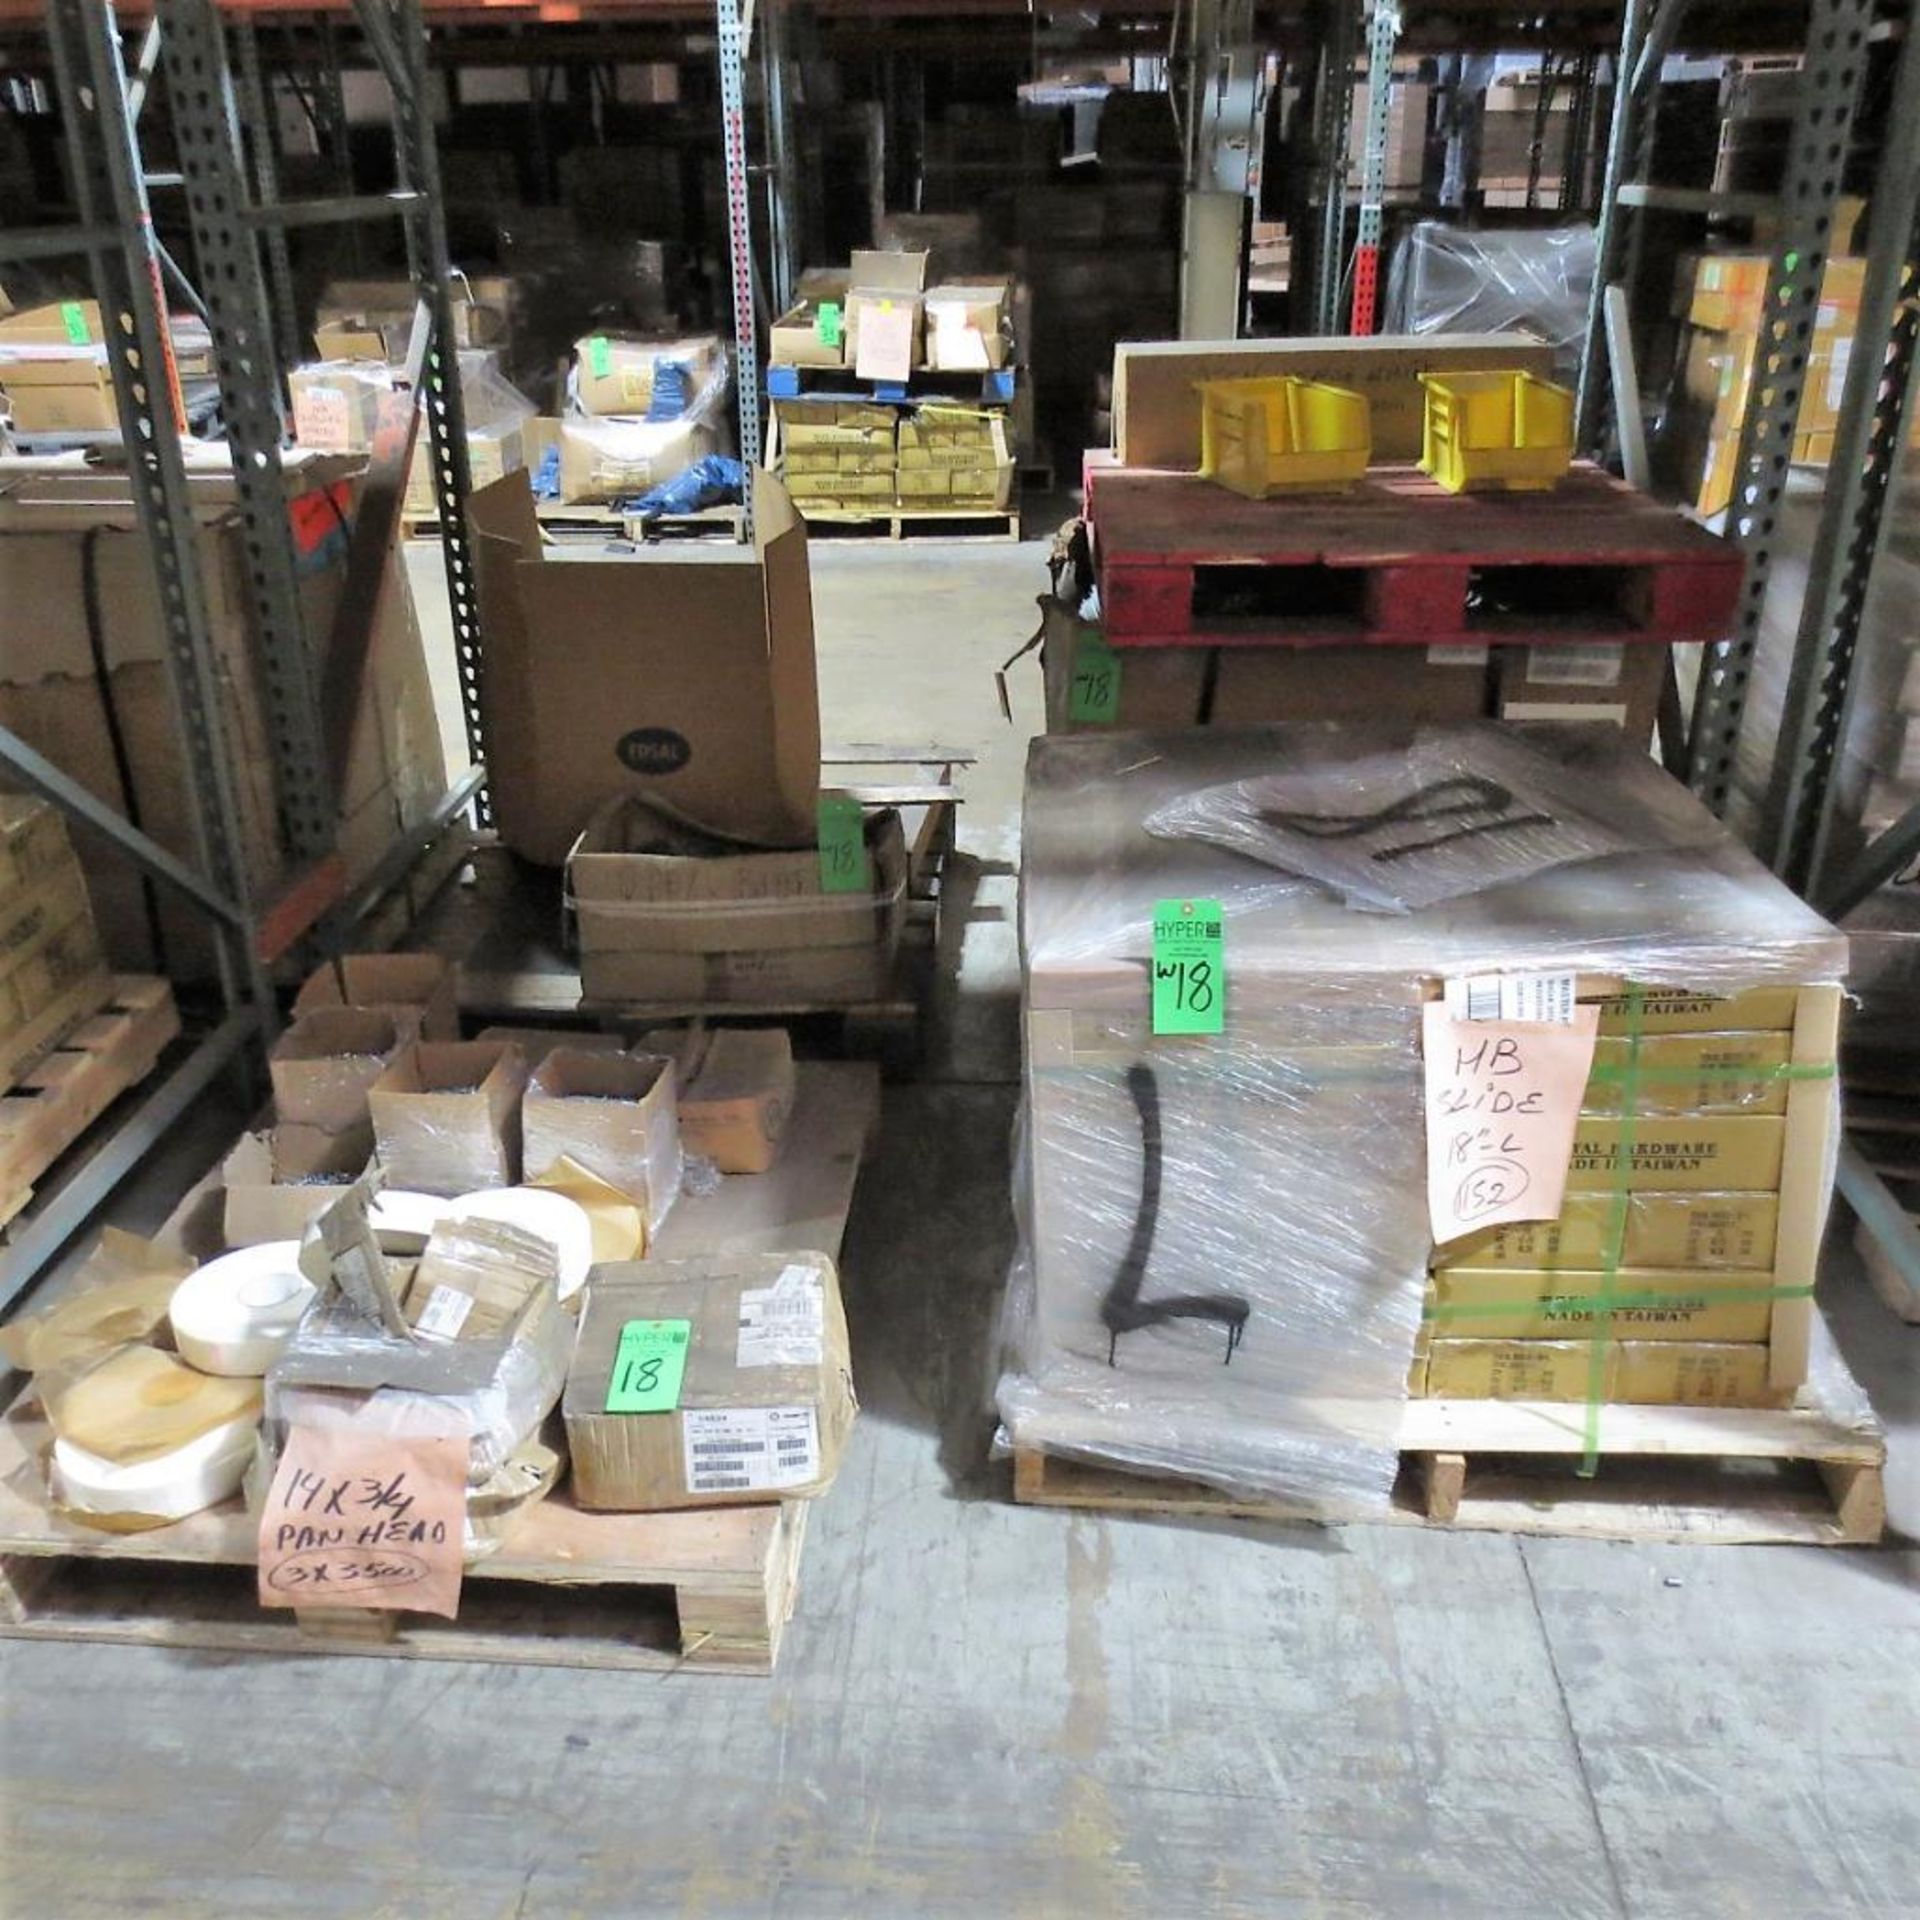 Appx. 2950 21" Runner Inner, Appx. 200 33x33x48 Plastic Bag 2004126, Box Nuts Bolts, Box of casters,